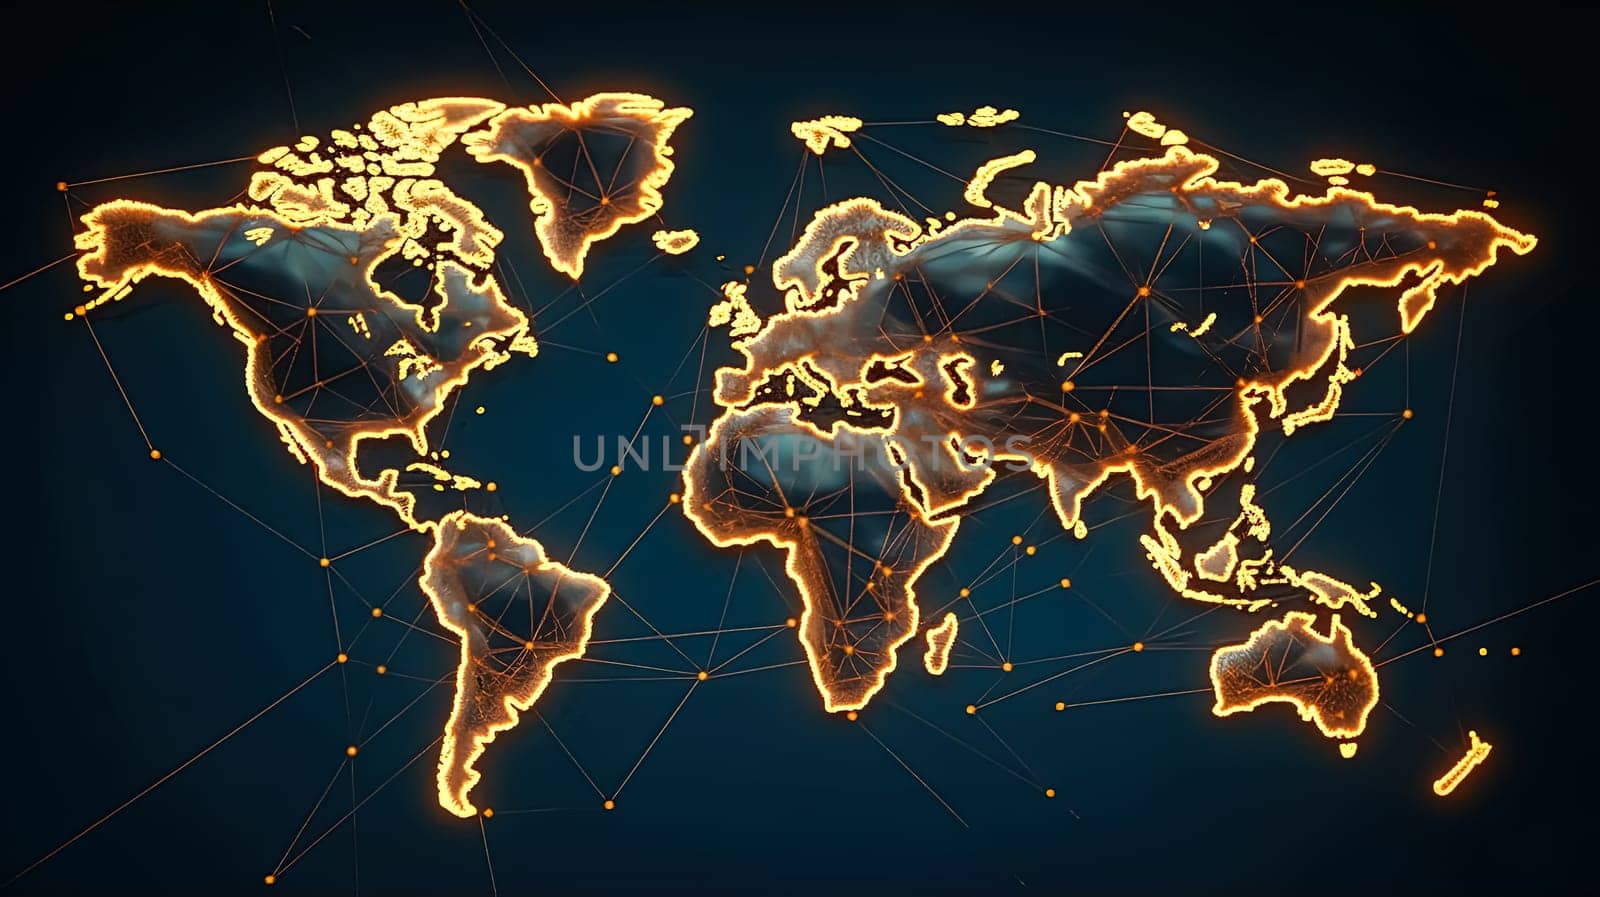 Neon Earth glow, Map shines with energy saving brilliance a vivid portrayal symbolizing the global dedication to a sustainable and efficient future